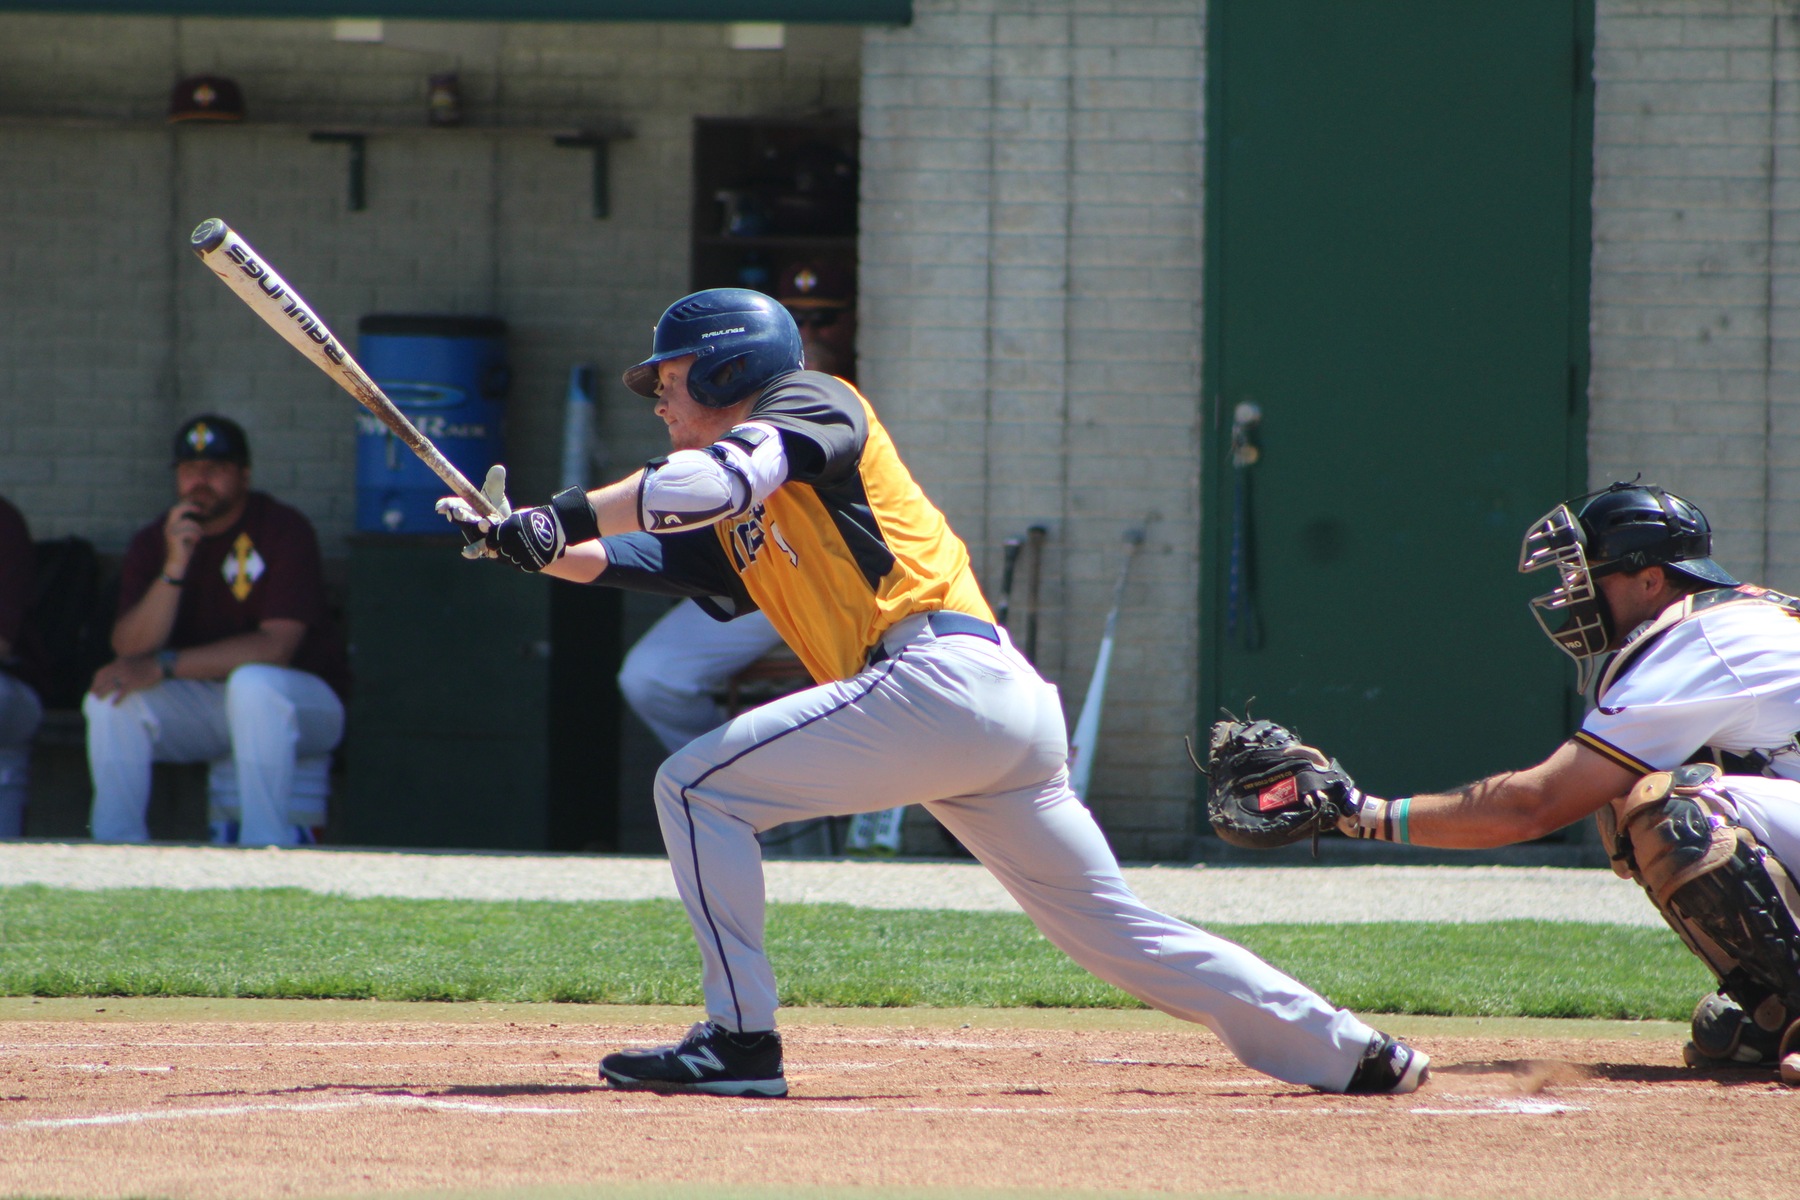 Adam Barrett tallied four hits on the day as the Tigers advanced in the Region XI Tournament